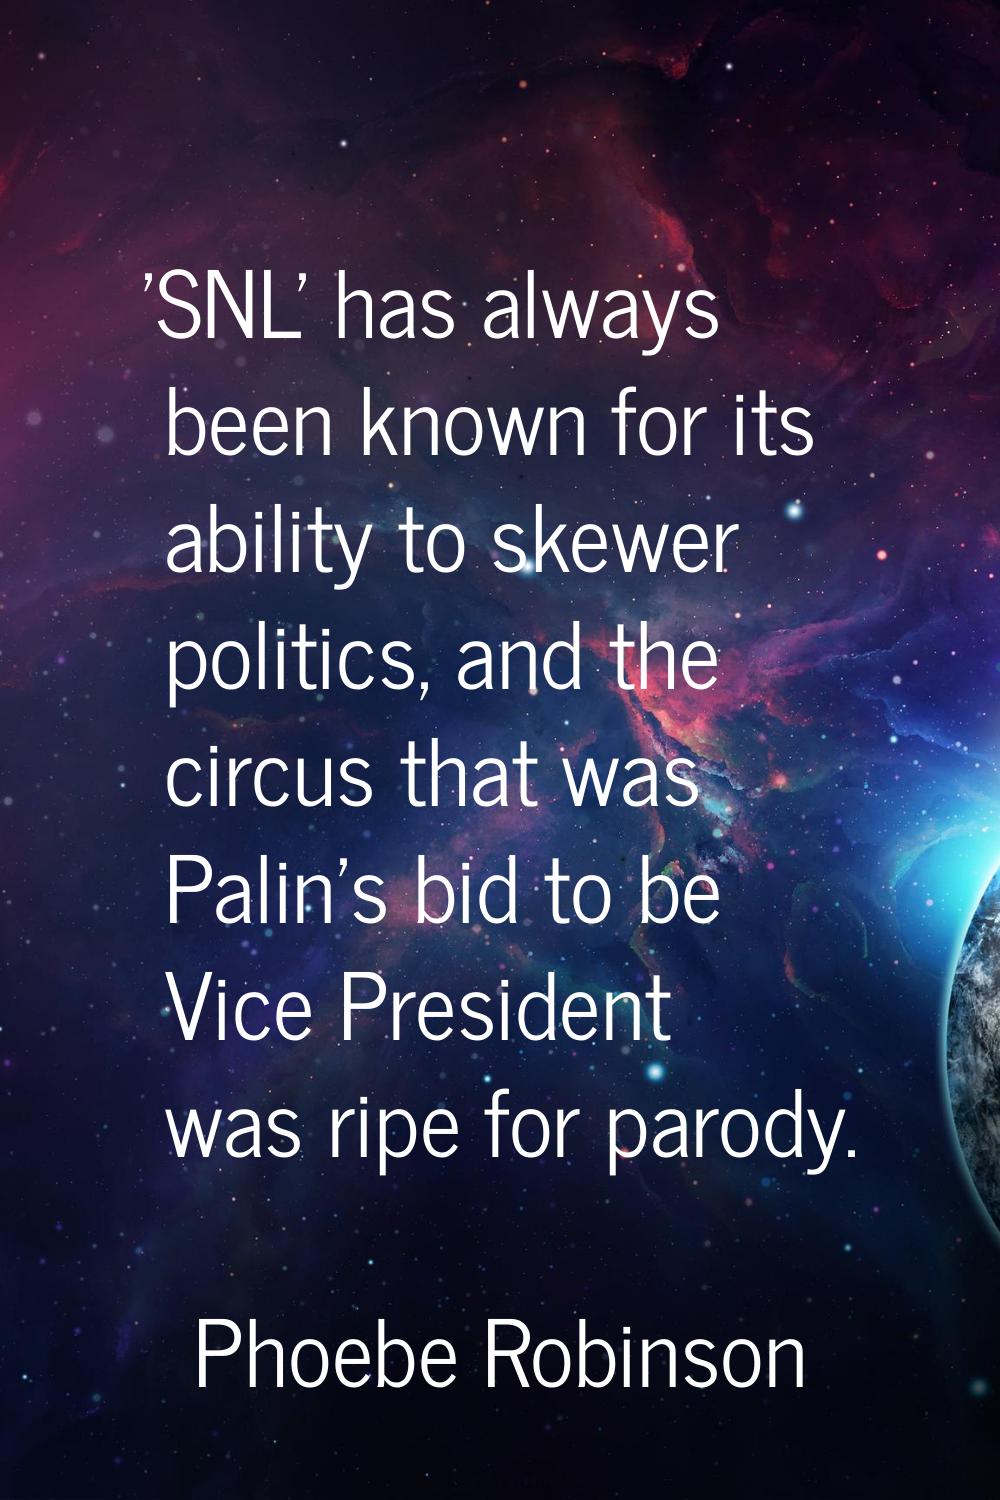 'SNL' has always been known for its ability to skewer politics, and the circus that was Palin's bid